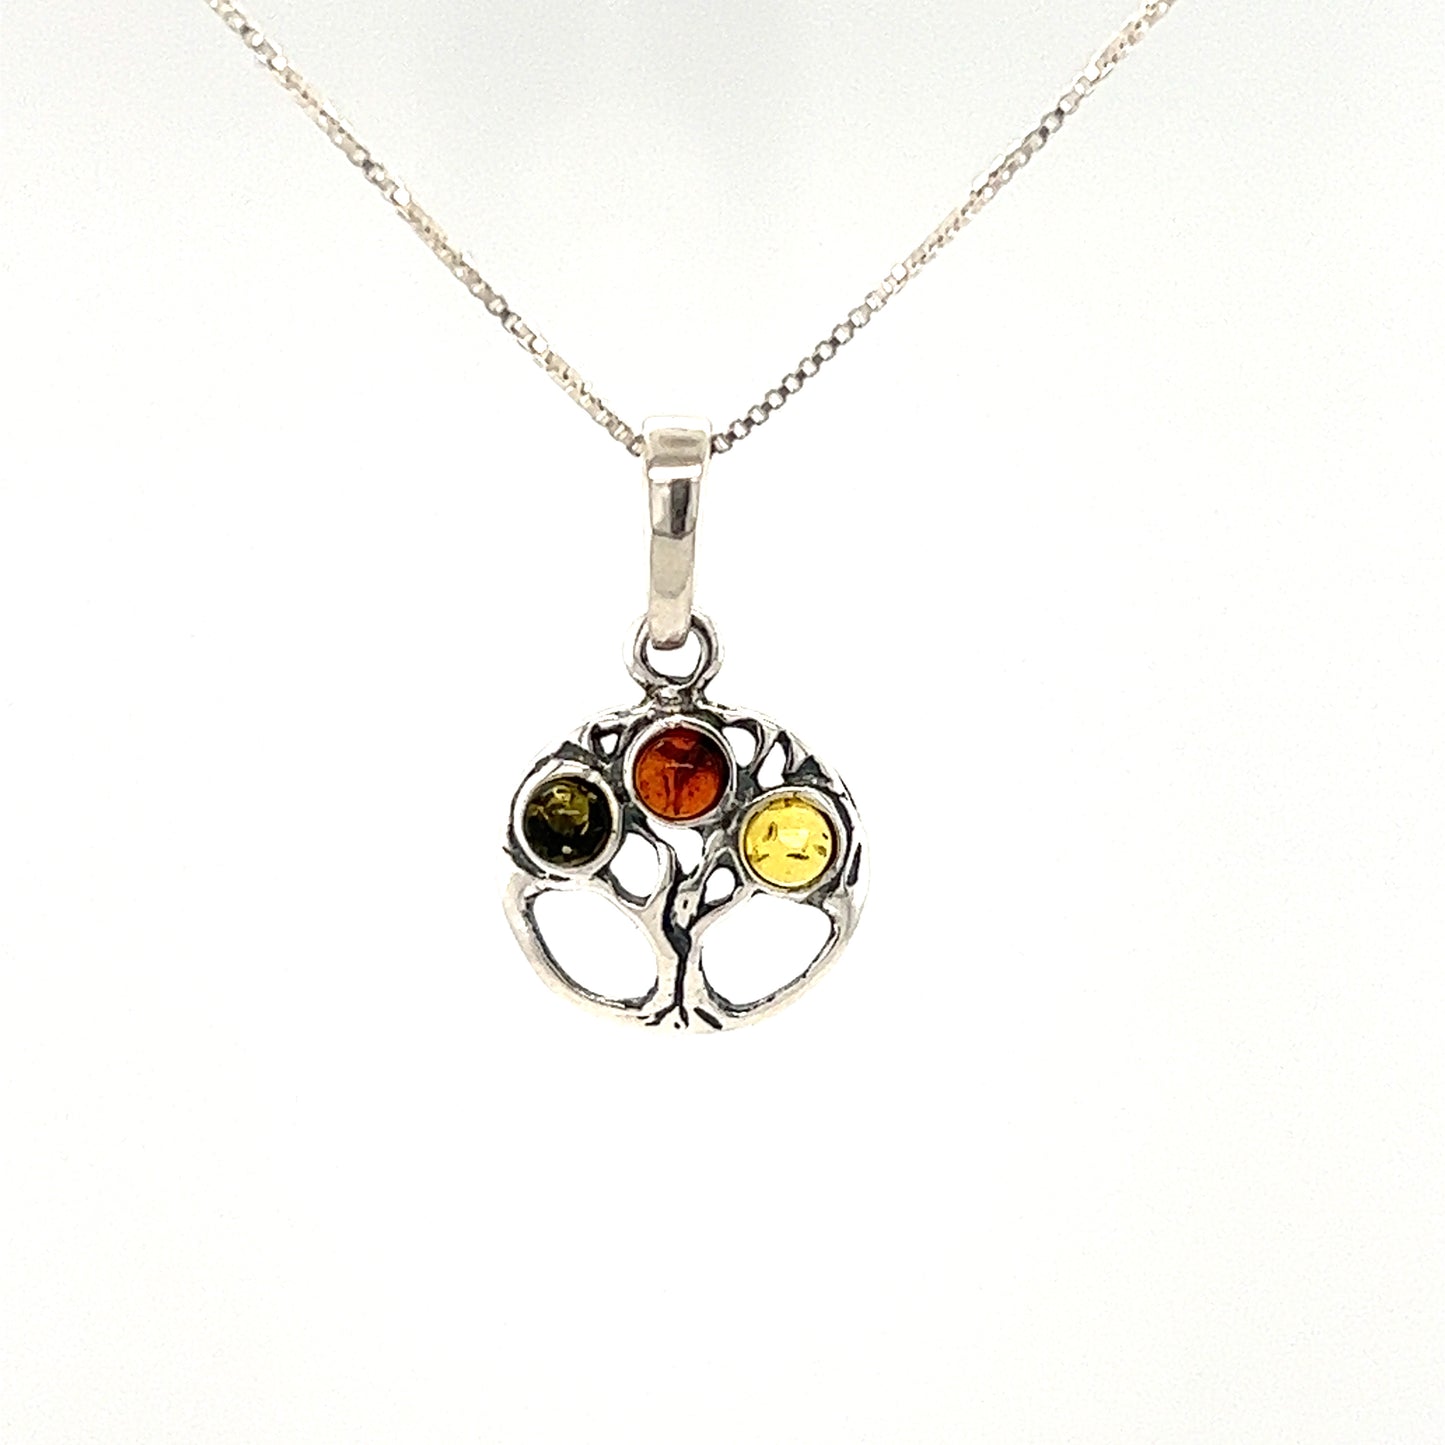 A beautiful Super Silver Dainty Amber Tree of Life Pendant necklace with Baltic amber stones.